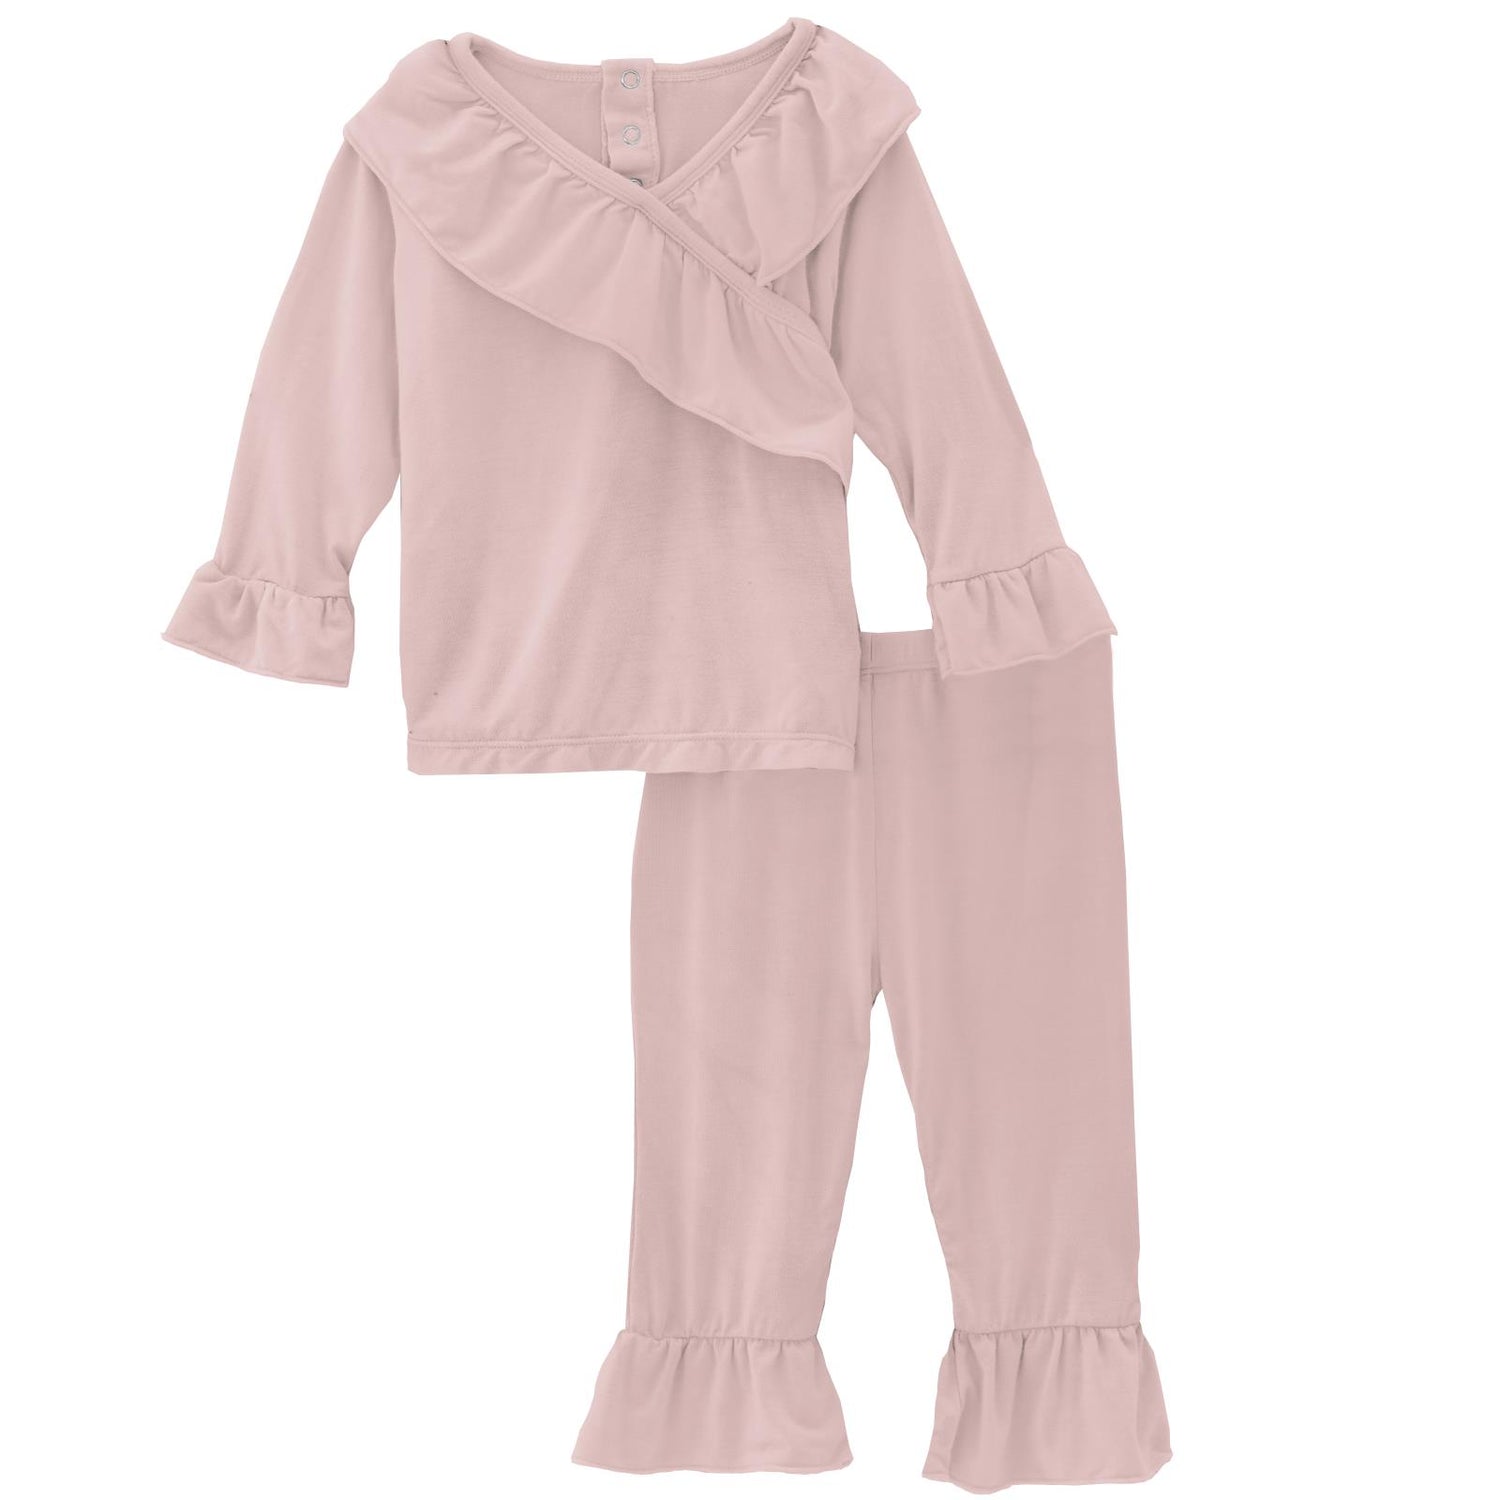 Long Sleeve Kimono Double Ruffle Outfit Set in Baby Rose